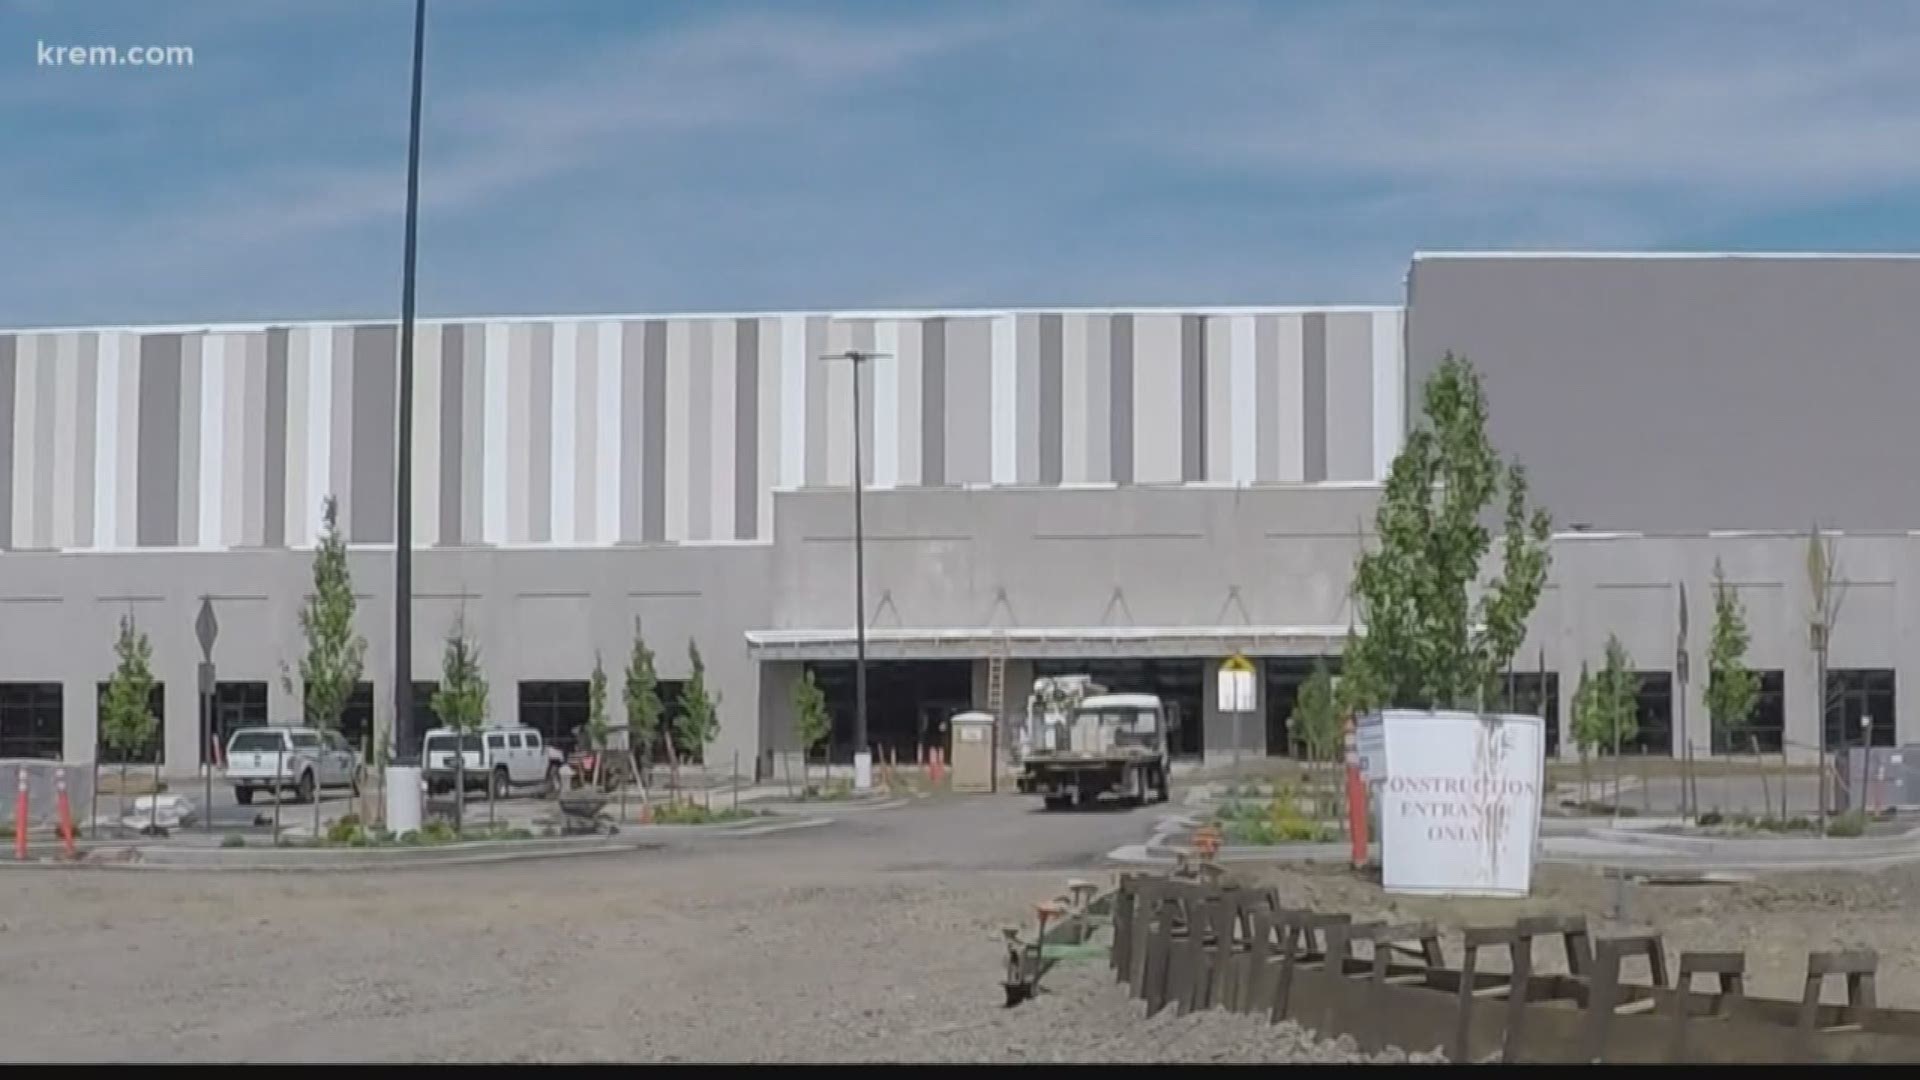 The Amazon fulfillment center near the Spokane International Airport is expected to open by mid-2020.